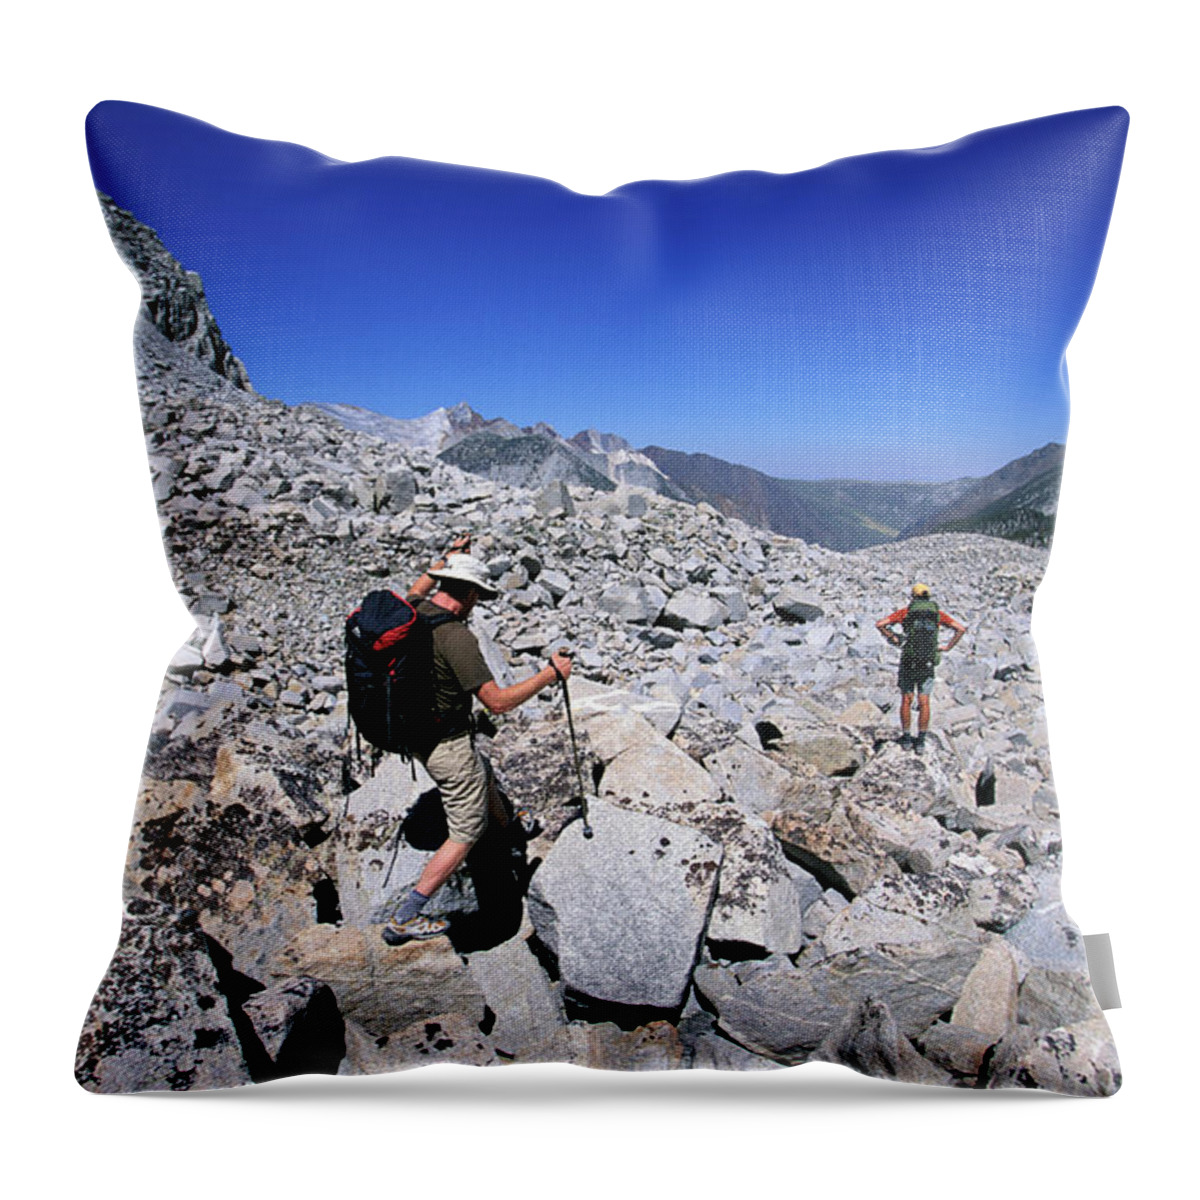 Adult Throw Pillow featuring the photograph Two Hikers In A Boulder Filled Valley #1 by Corey Rich